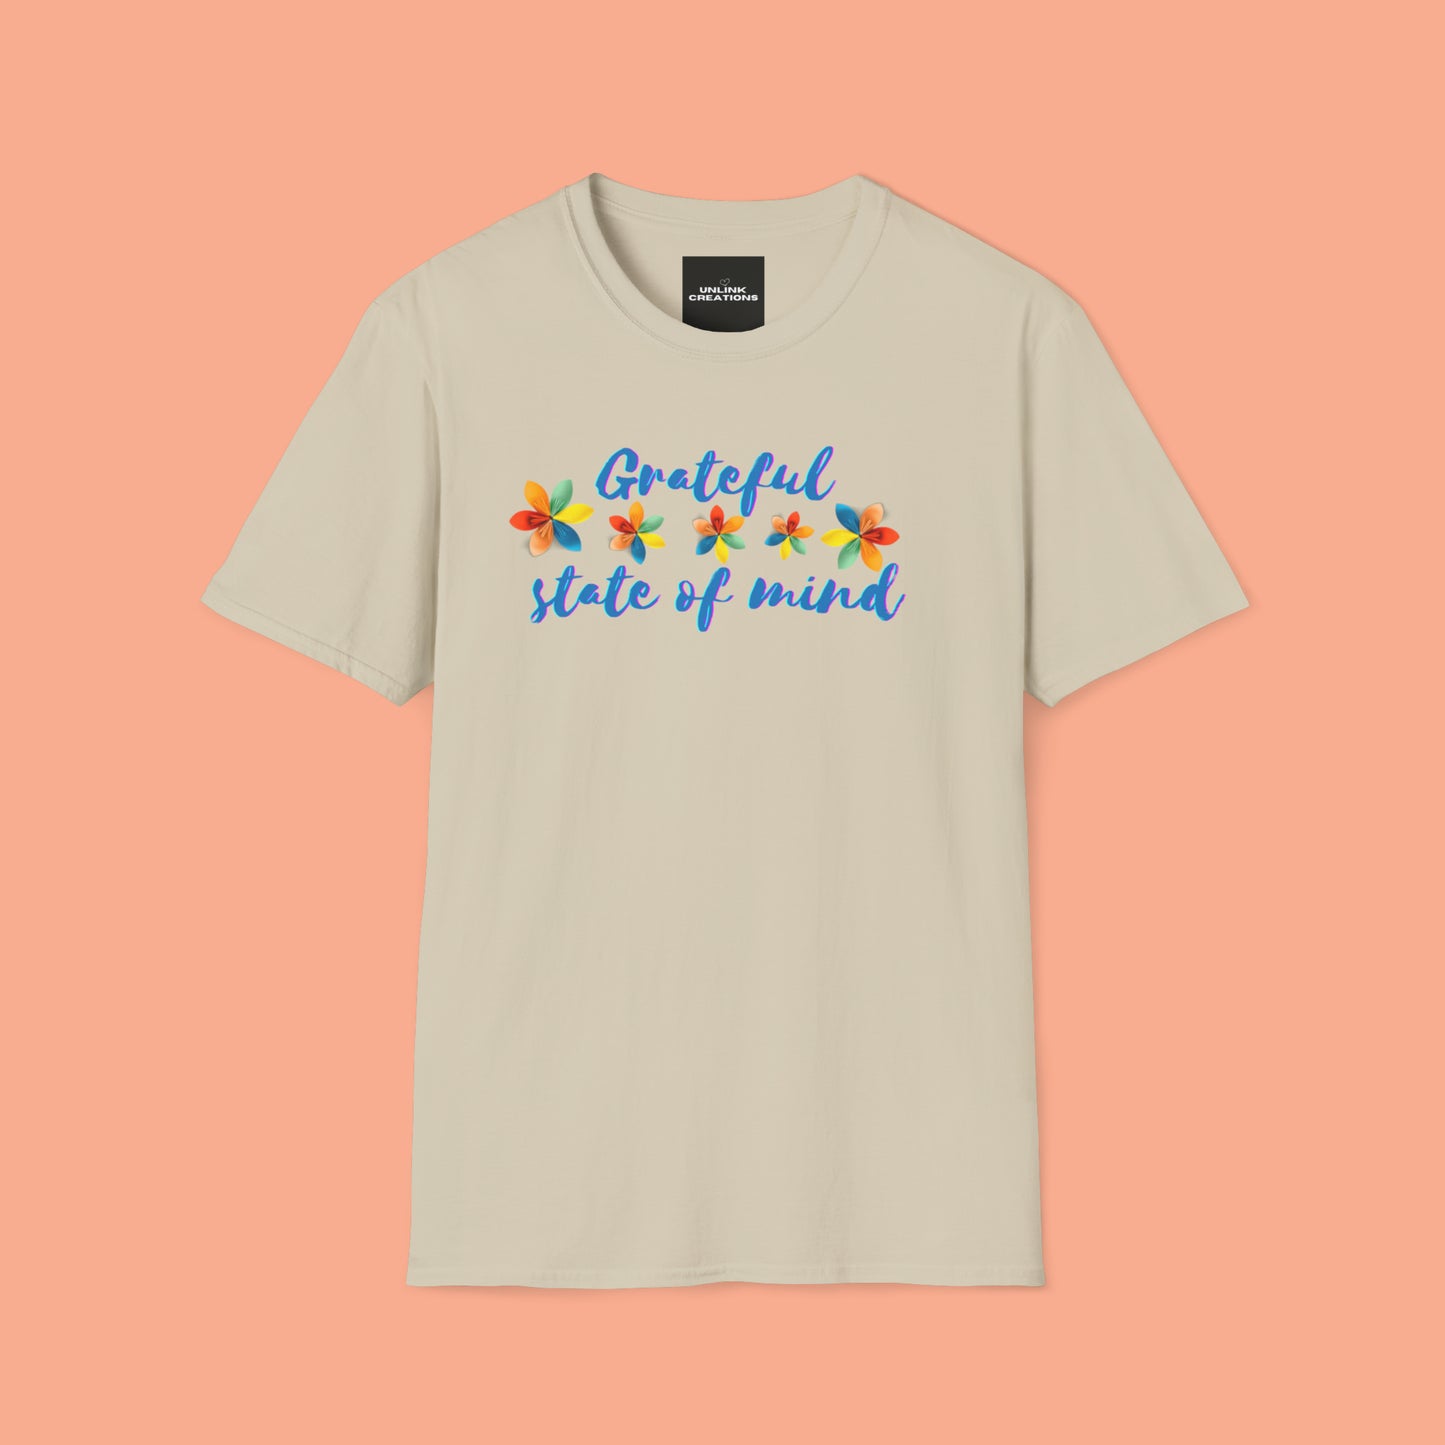 A "grateful state of mind" is a wonderful state to be in. Our mindsets have tremendous impact in our perspectives. This is a Unisex Softstyle T-Shirt.